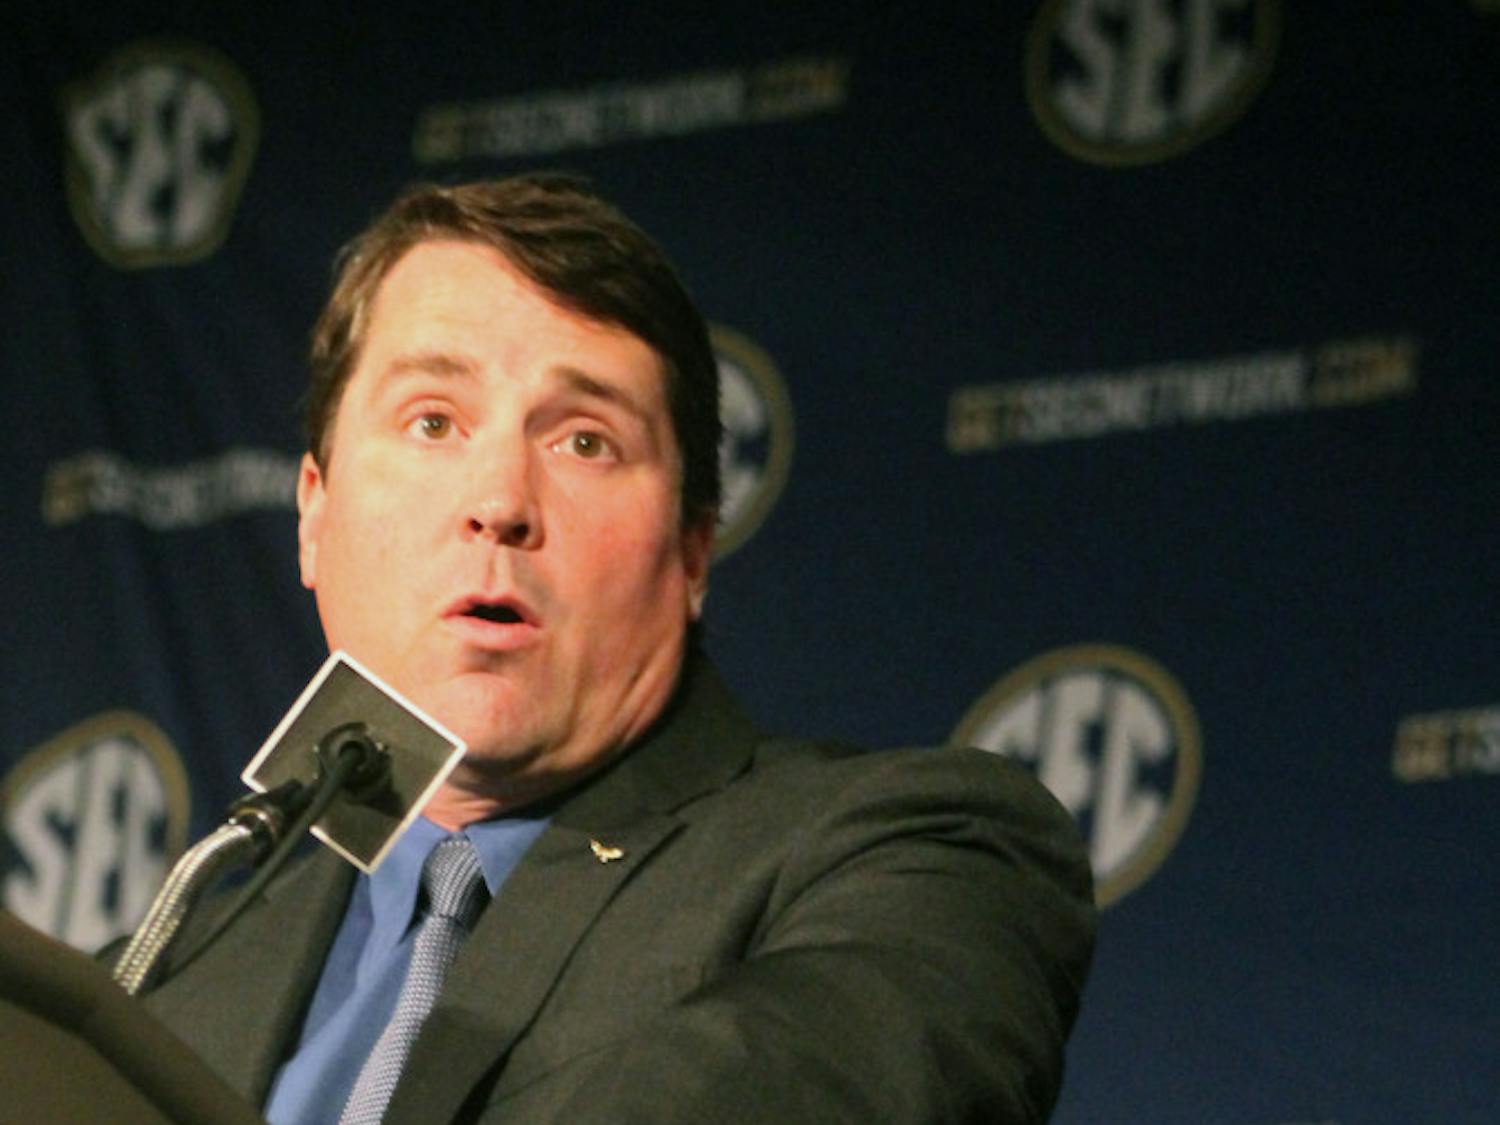 UF coach Will Muschamp speaks during the Southeastern Conference Media Days in Hoover, Ala., on July 14.